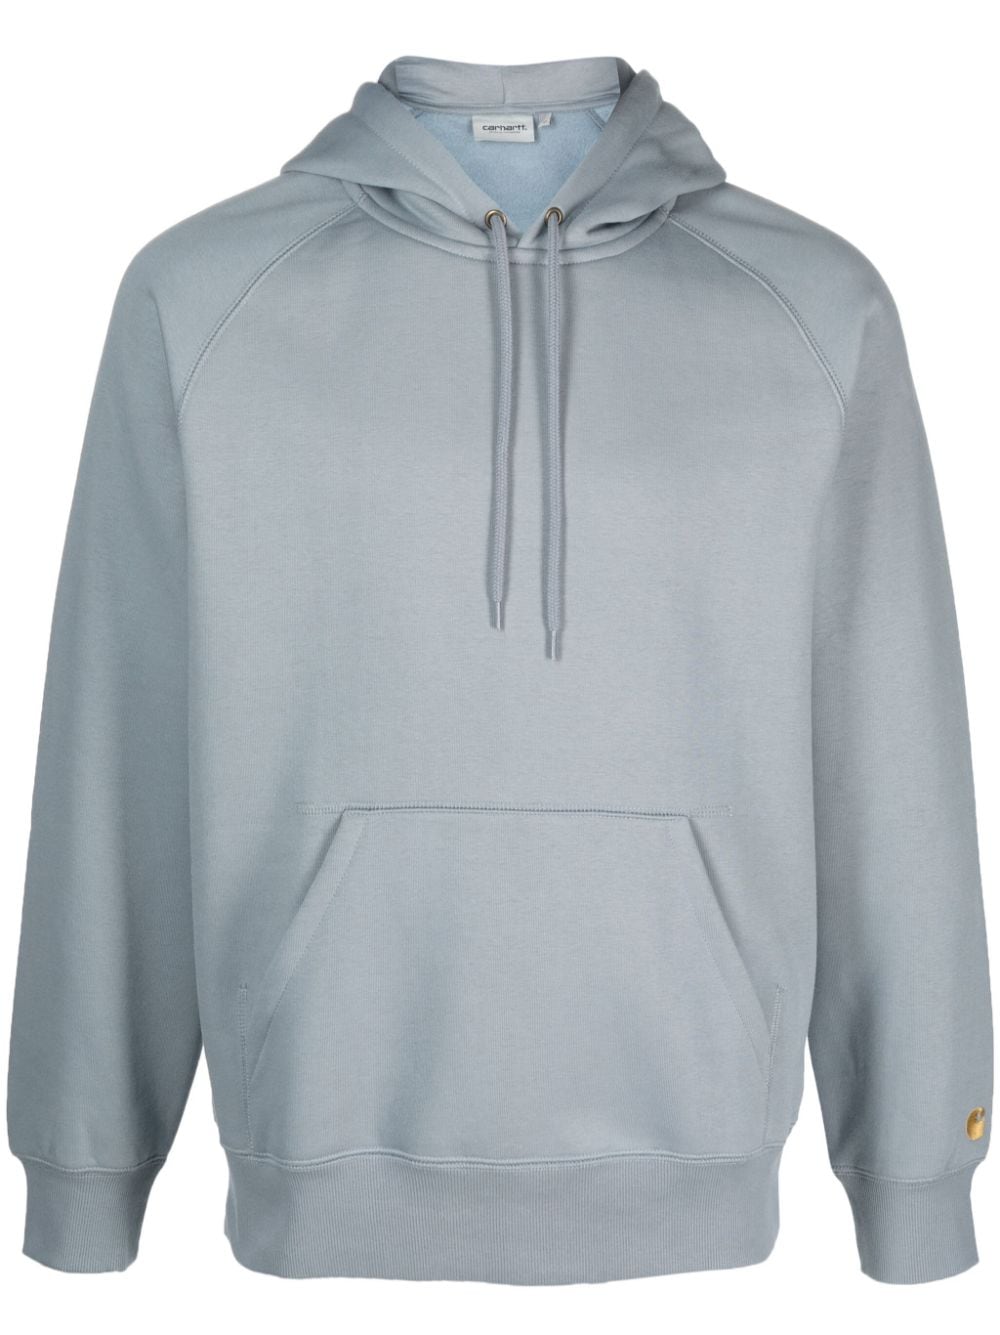 CARHARTT CHASE COTTON-BLEND HOODIE